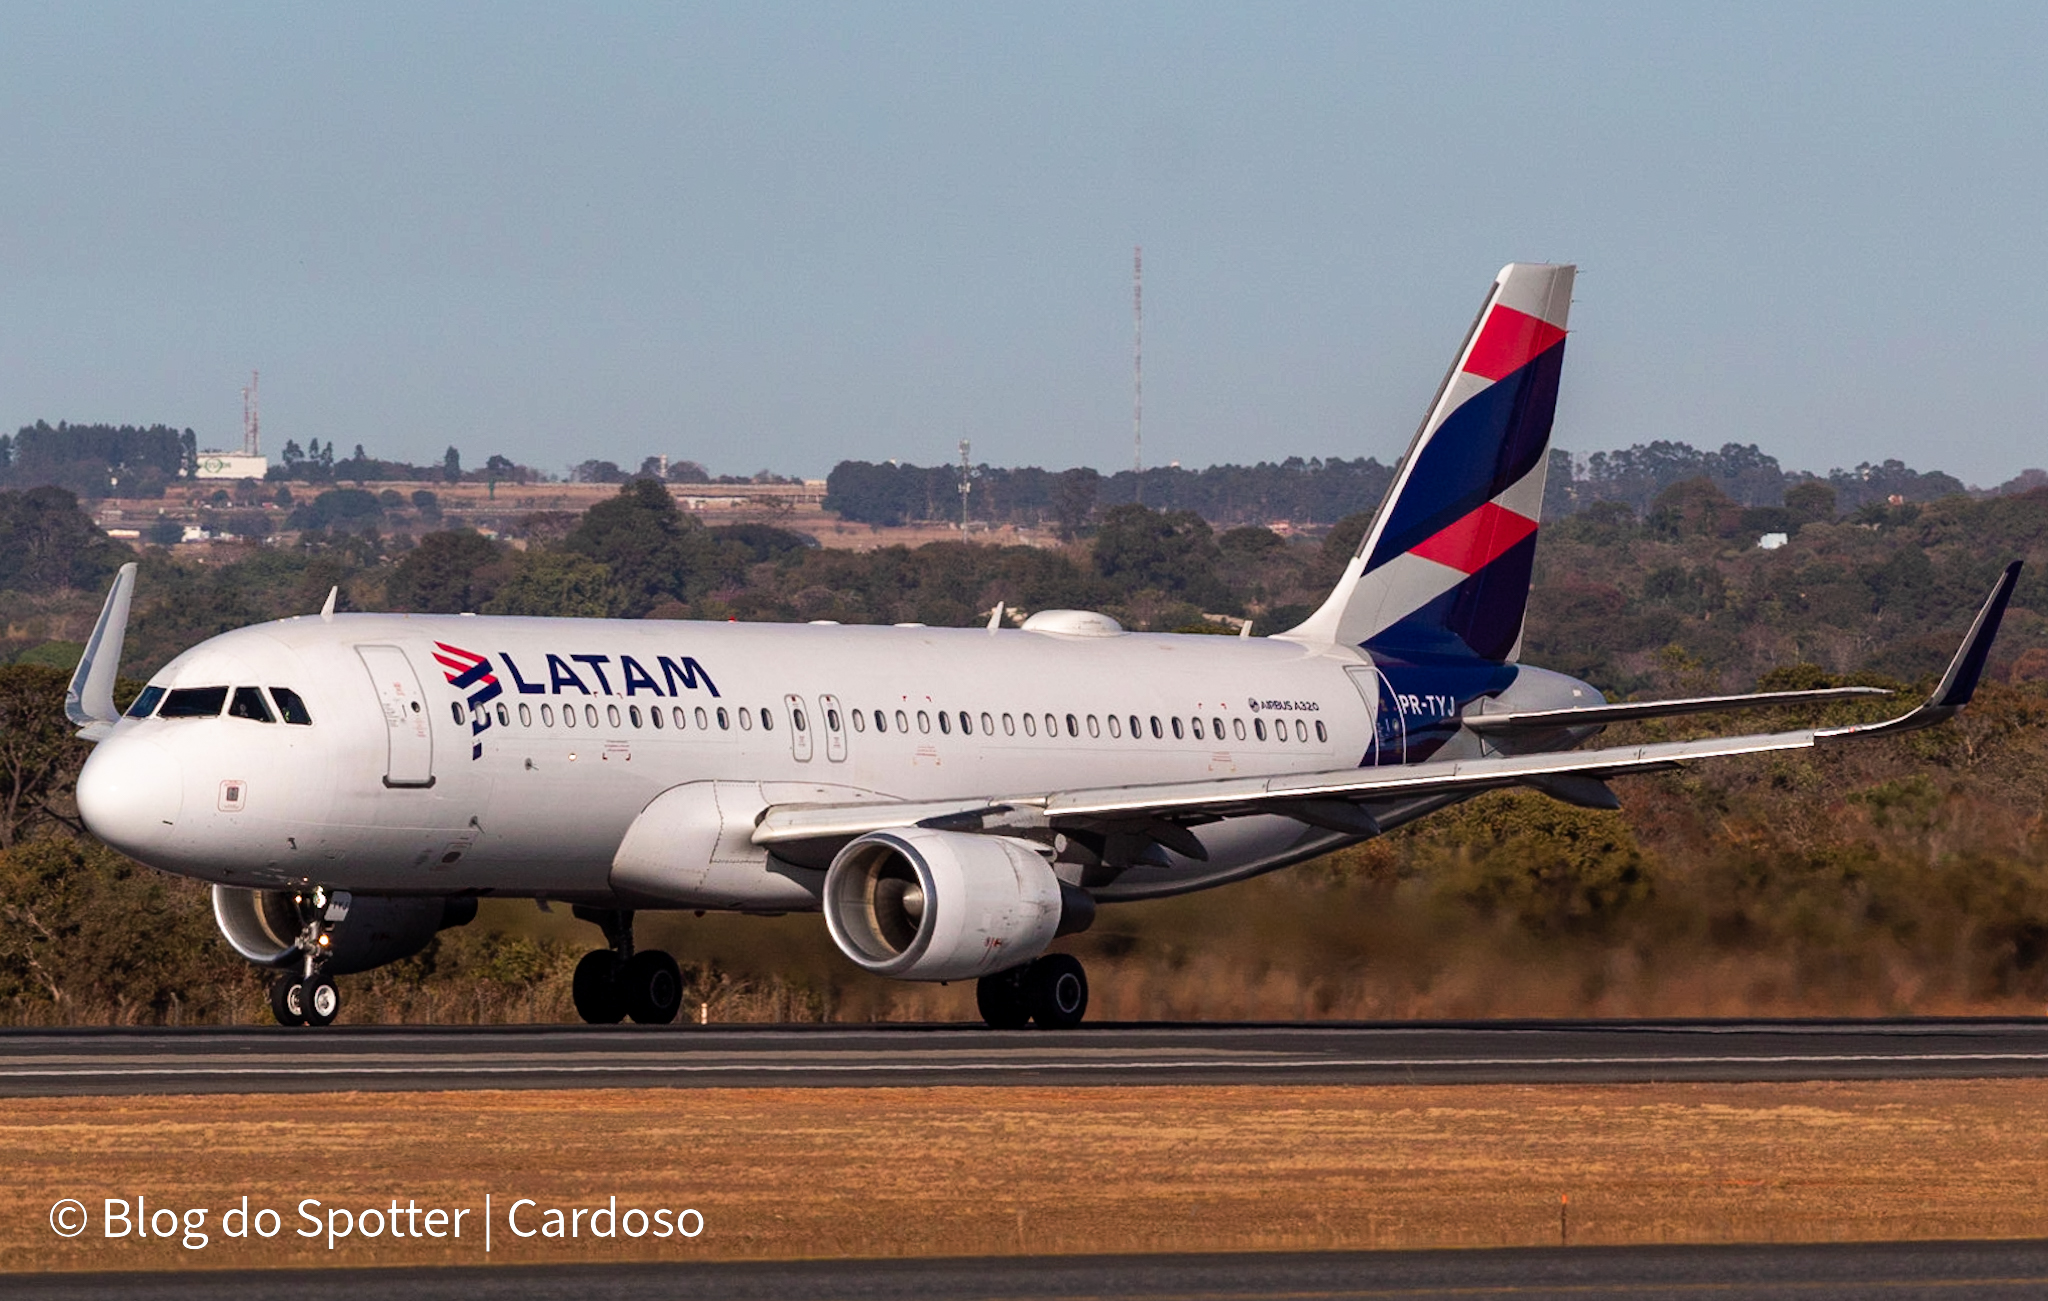 PR-TYJ - Airbus A320-214 WL - LATAM Airlines